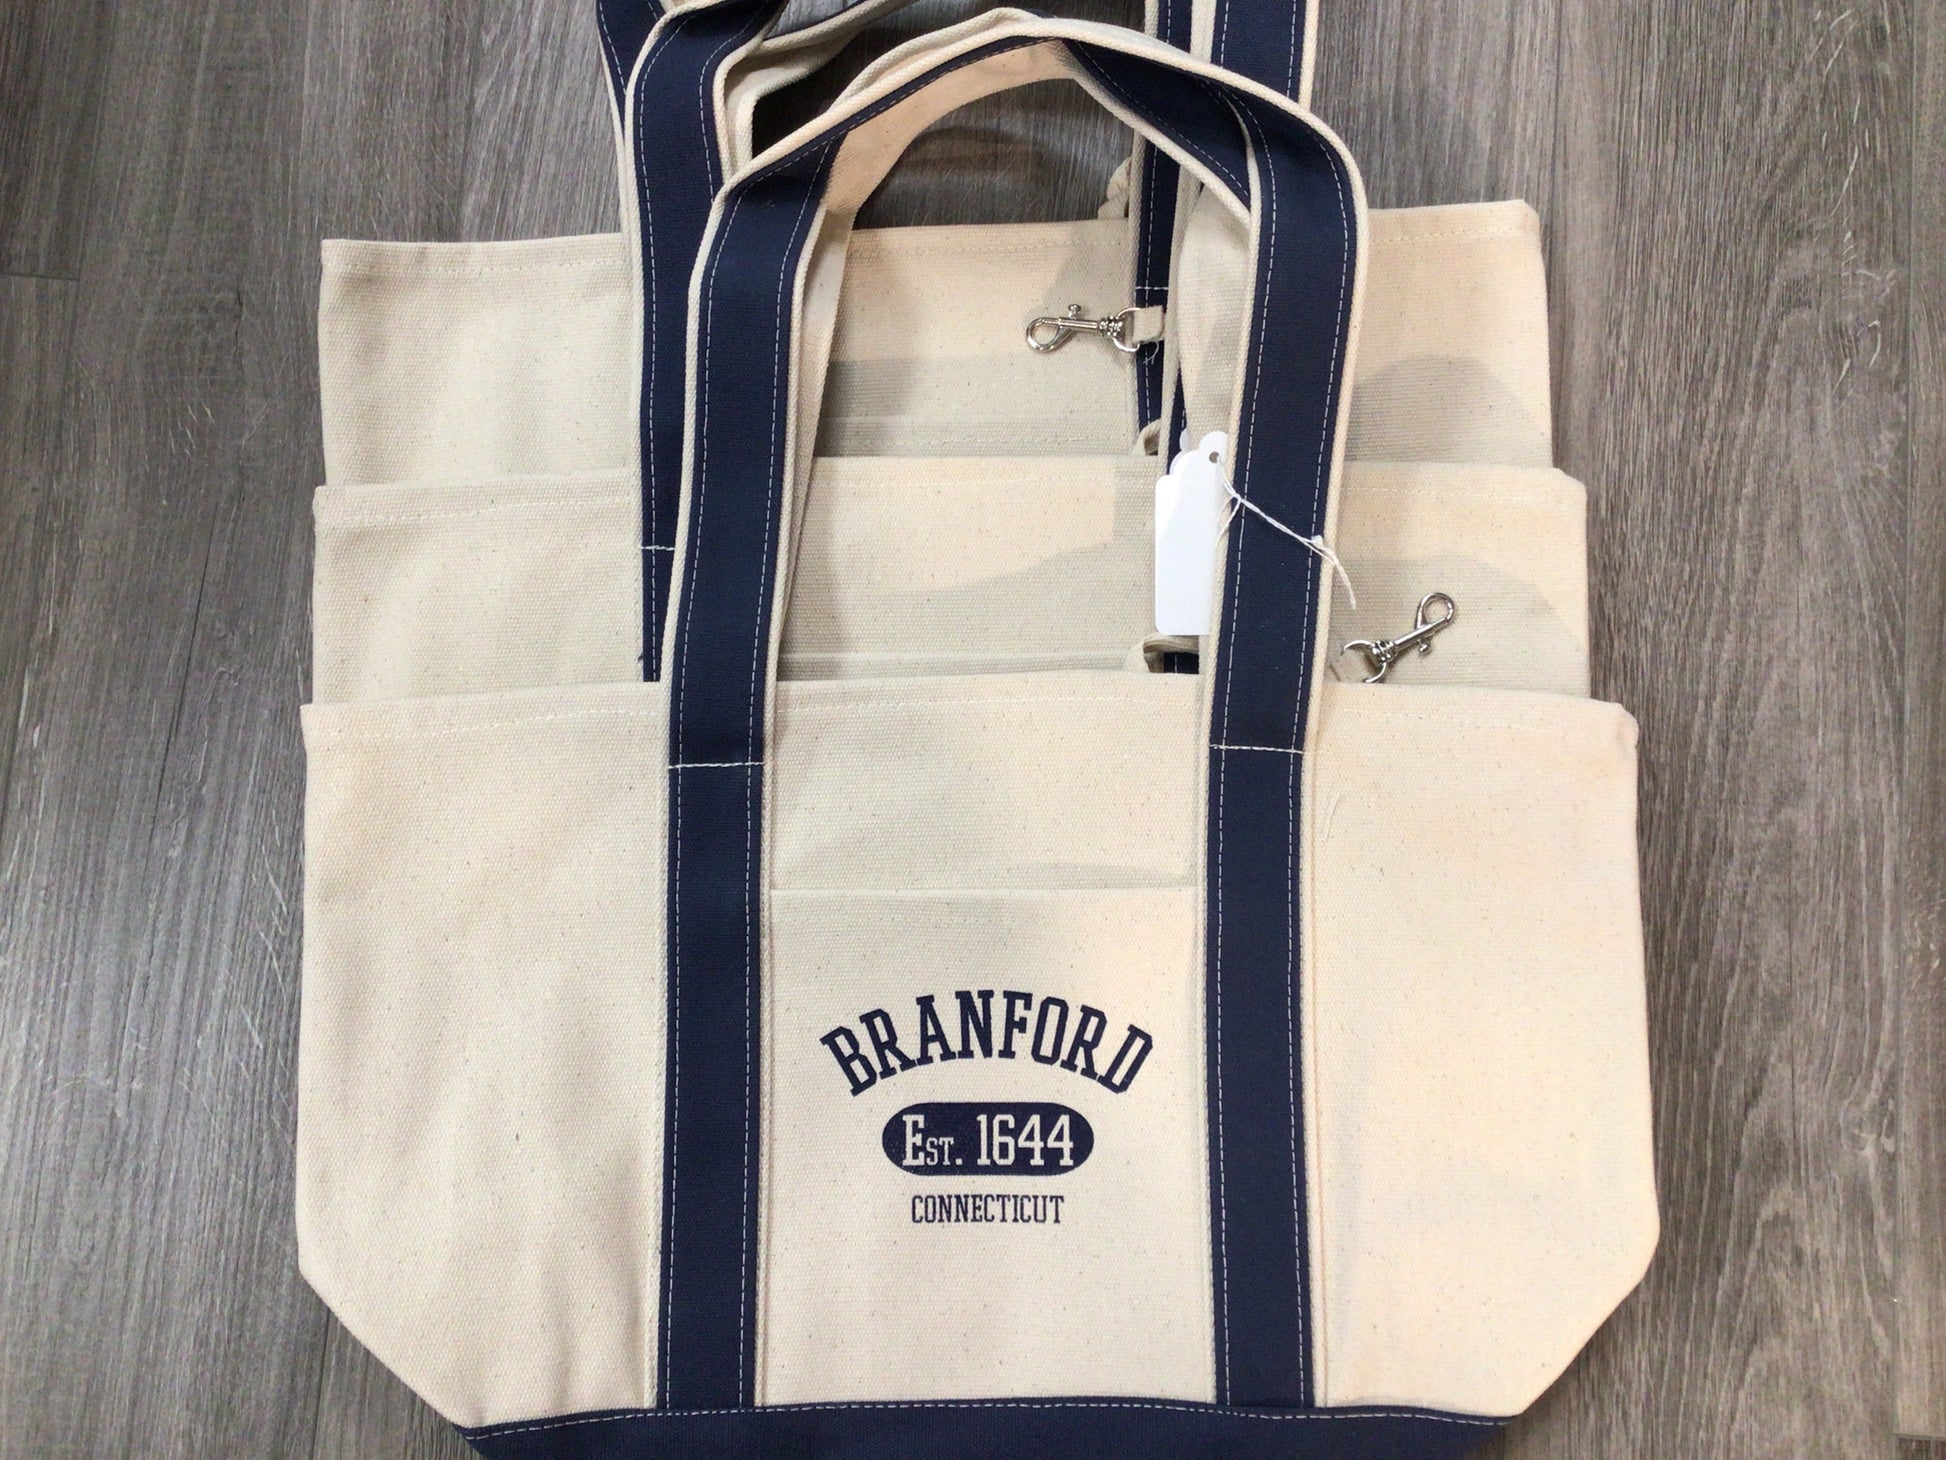 Branford canvas totes 18x18 with gussets. Heavy duty canvas with long straps that can be slung over your shoulder.